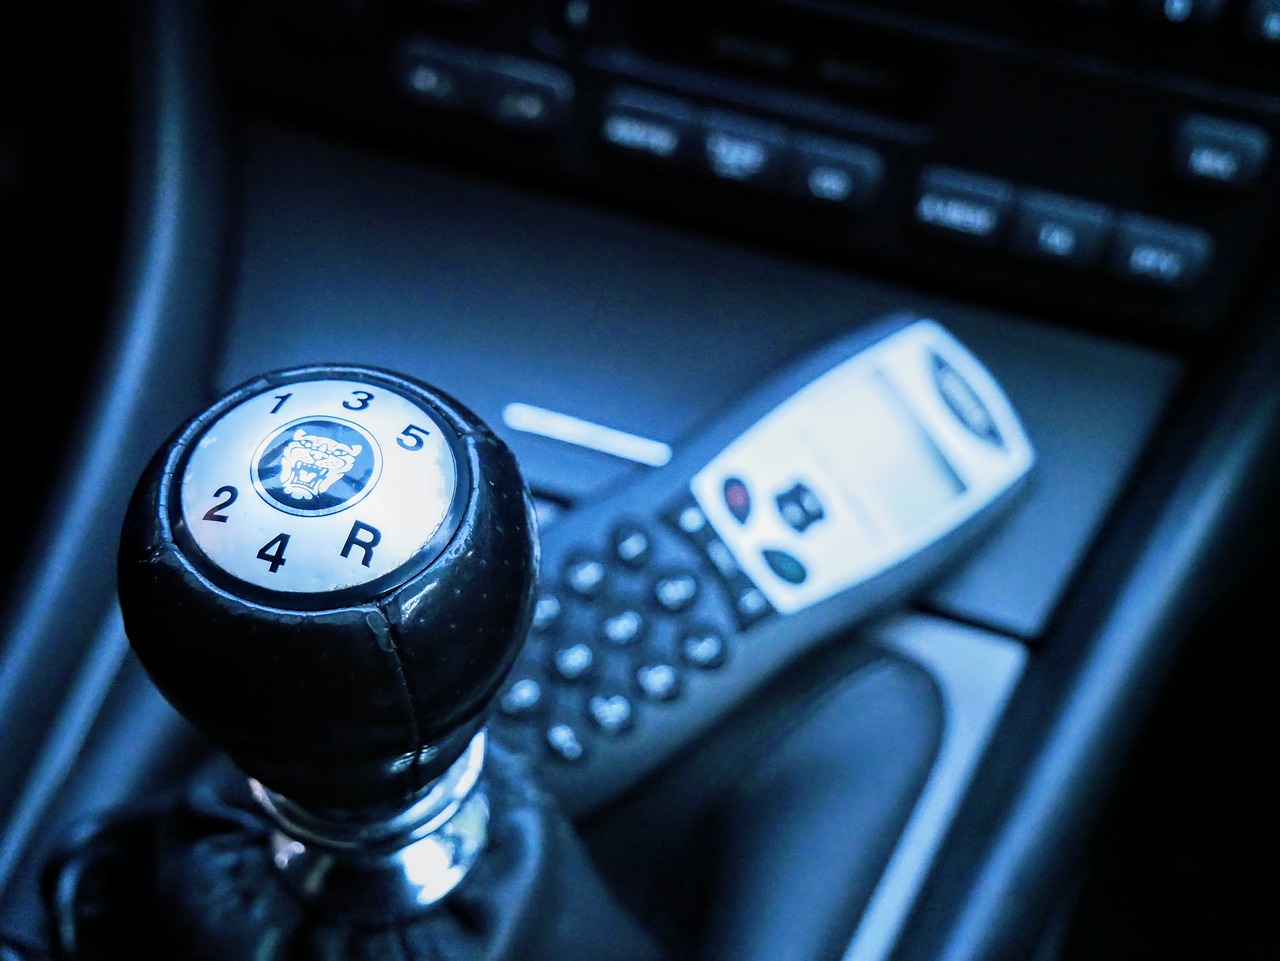 How to Start Driving a Manual Transmission